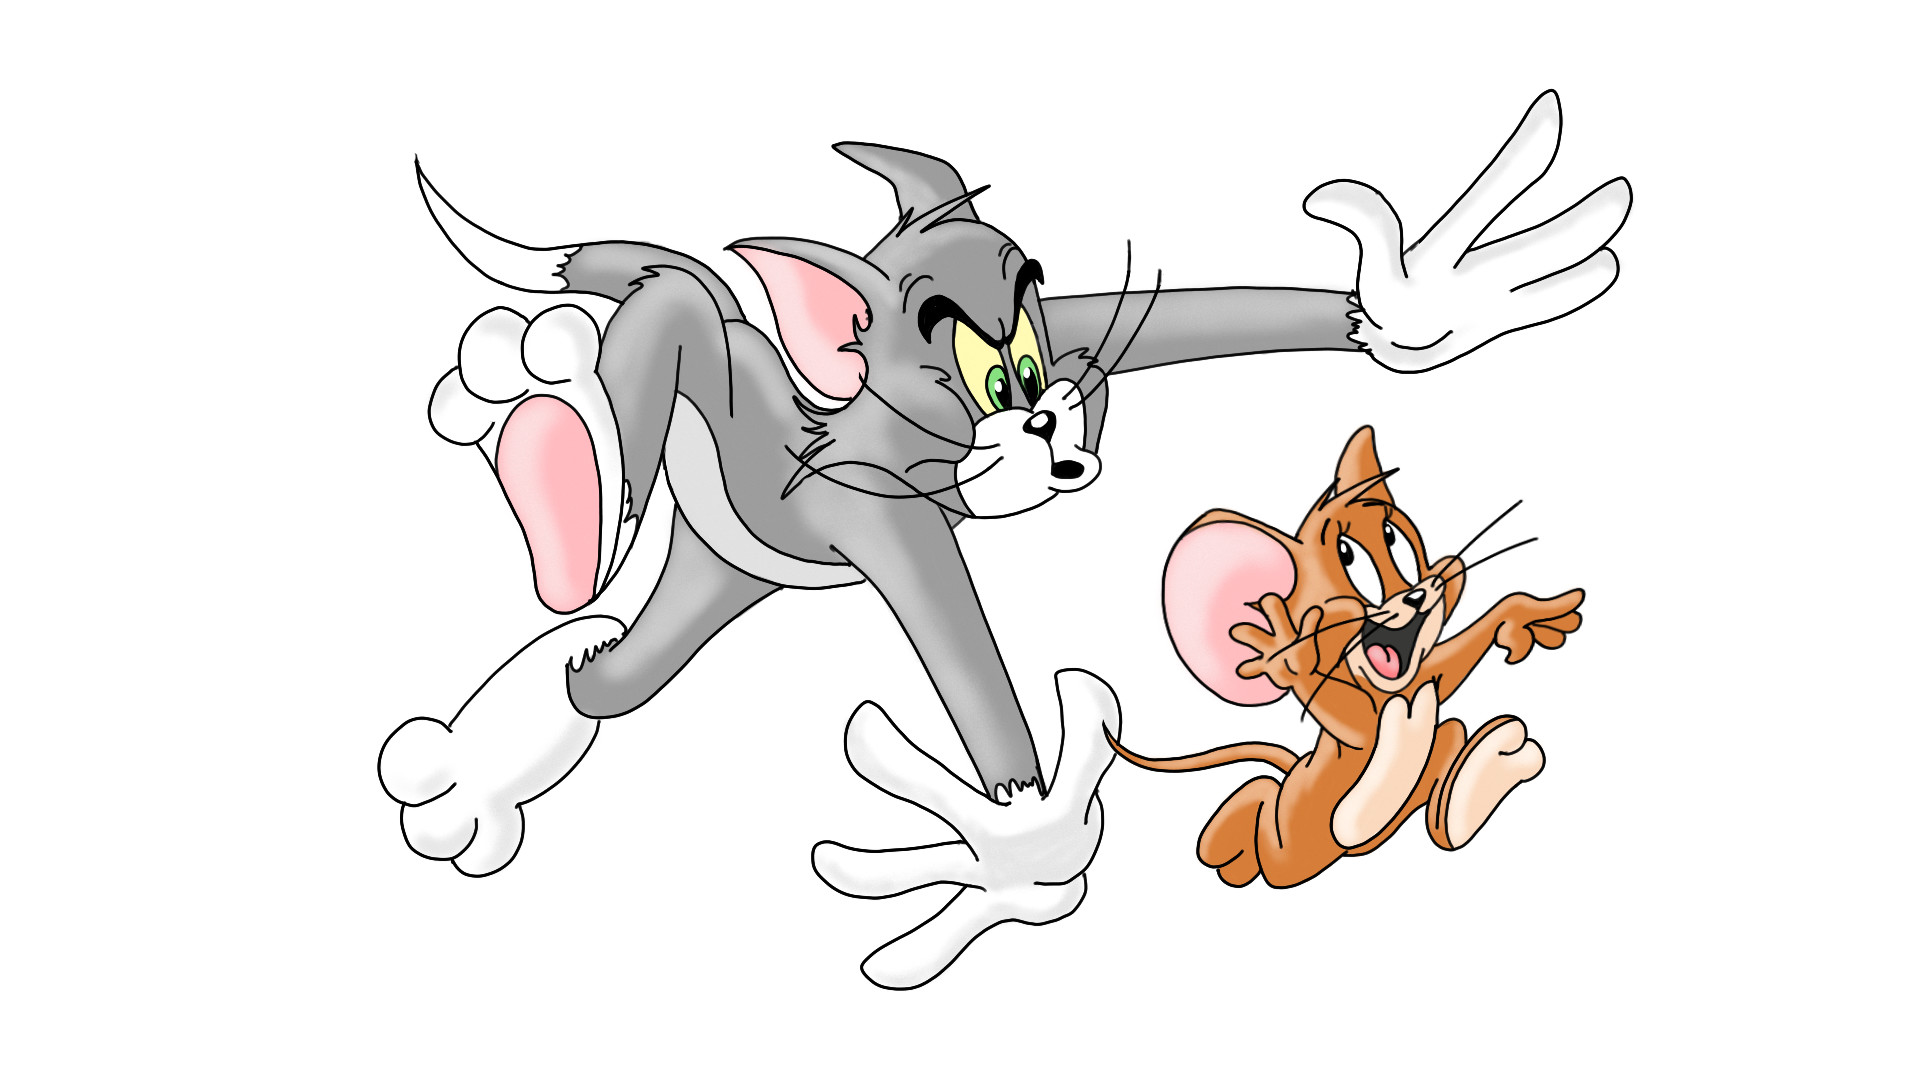 TOM & JERRY drawing, Easy 10 mins Painting with Poster Colors | CARTOON  DRAWING - YouTube